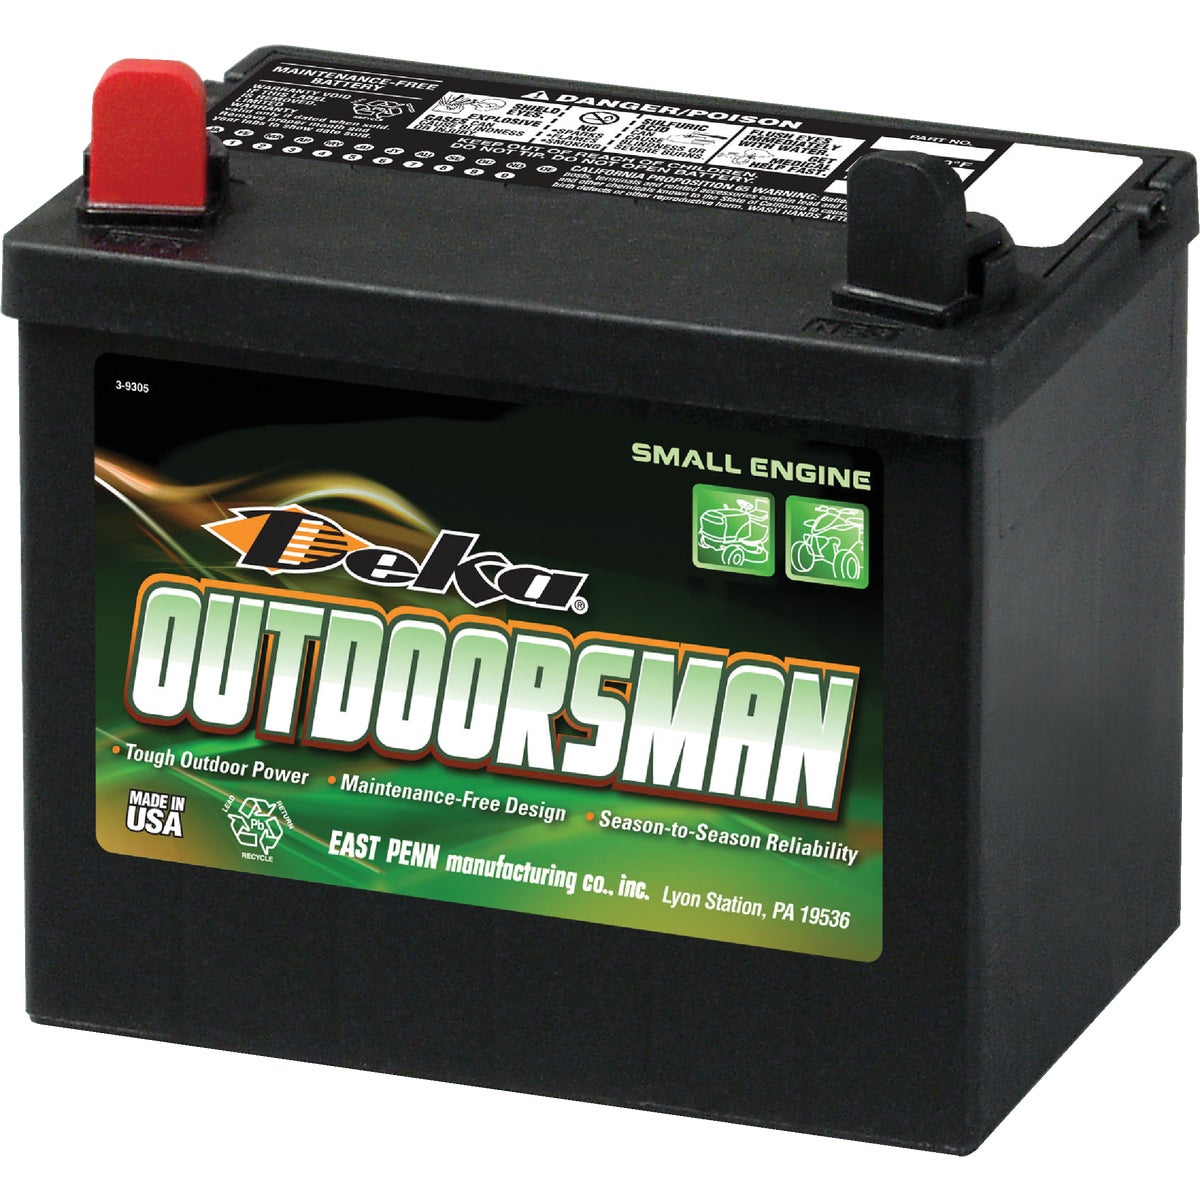 Item 575569, Garden tractor, snowmobile, and utility battery provides maintenance-free 